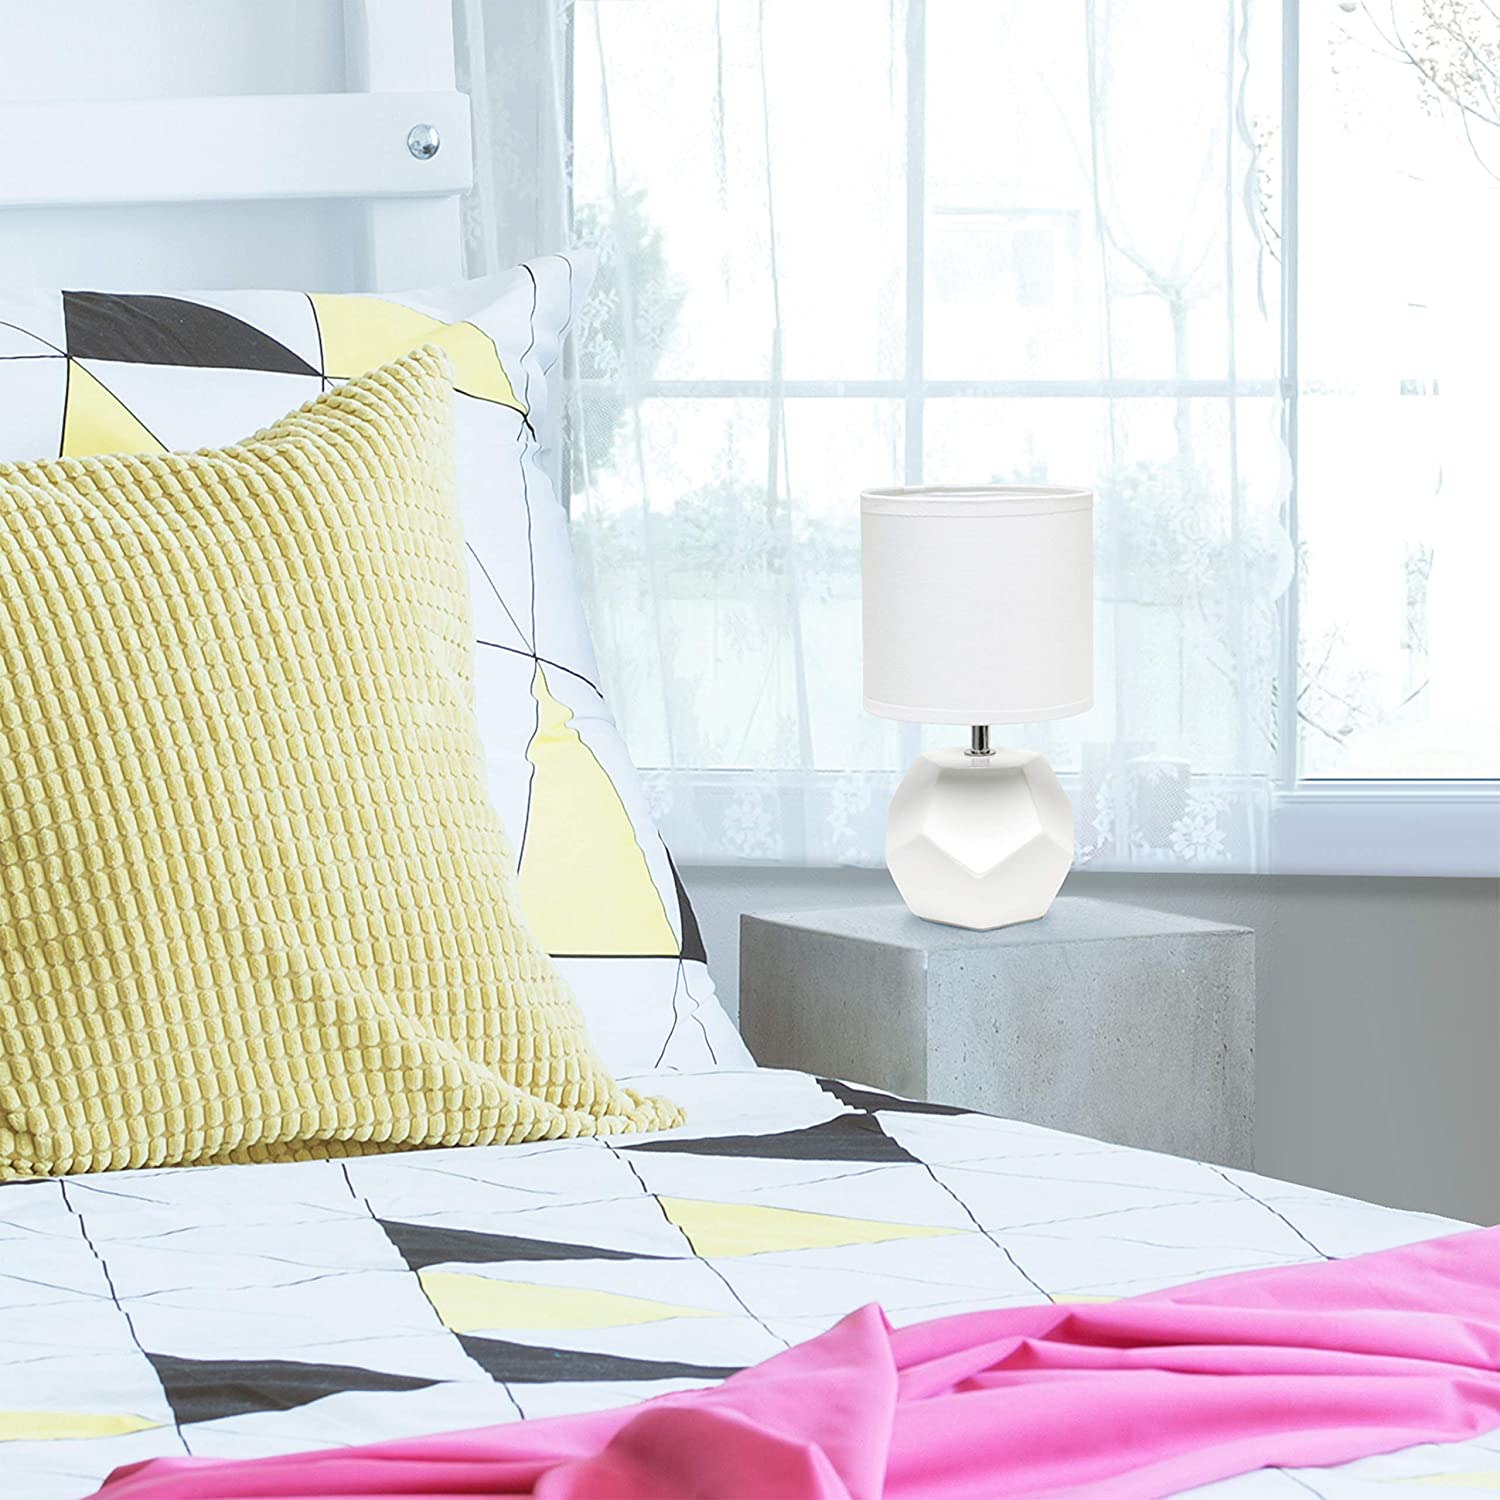 Simple Designs Round Prism Mini Table Lamp with Matching Fabric Shade